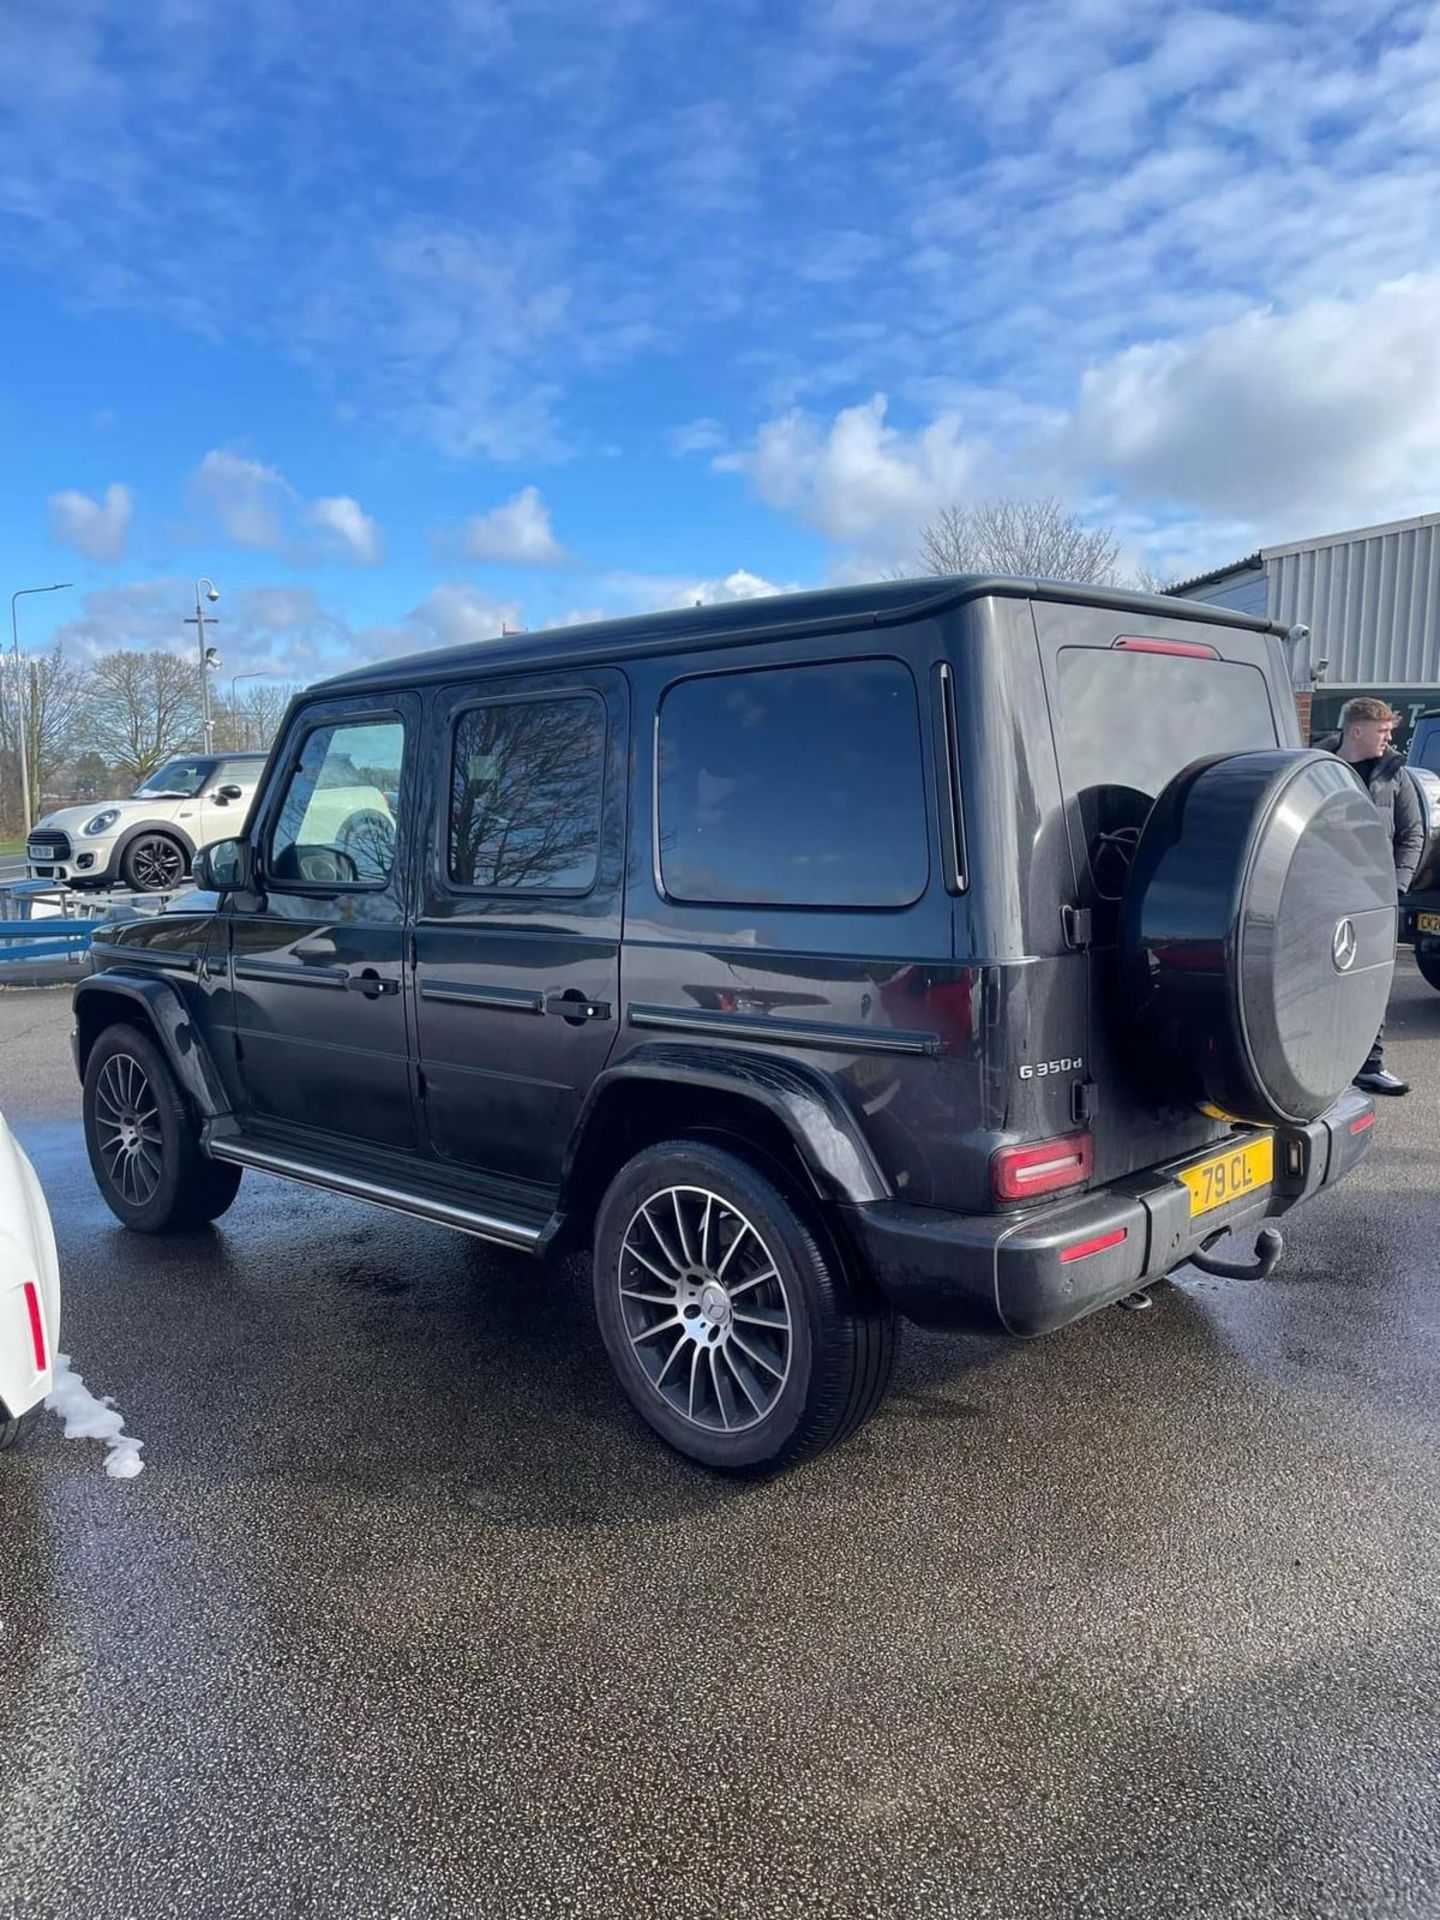 2019/19 REG MERCEDES-BENZ G350 AMG LINE PREMIUM D 4M AUTOMATIC RARE 7 SEAT, SHOWING 0 FORMER KEEPERS - Image 4 of 9